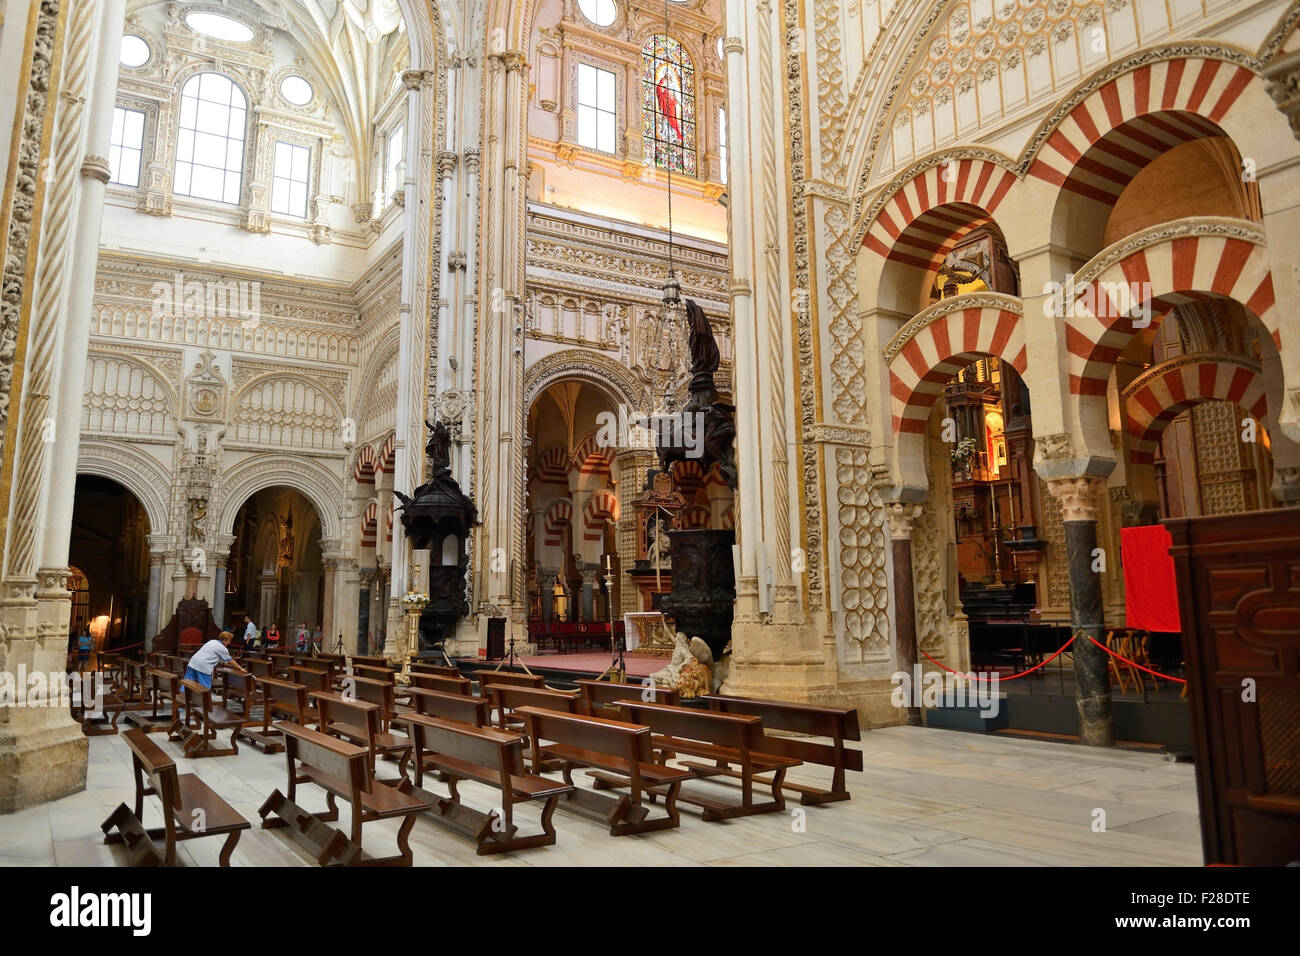 Mezquita catedral (Cathedral Mosque) in Cordoba, Andalusia, Spain Stock Photo